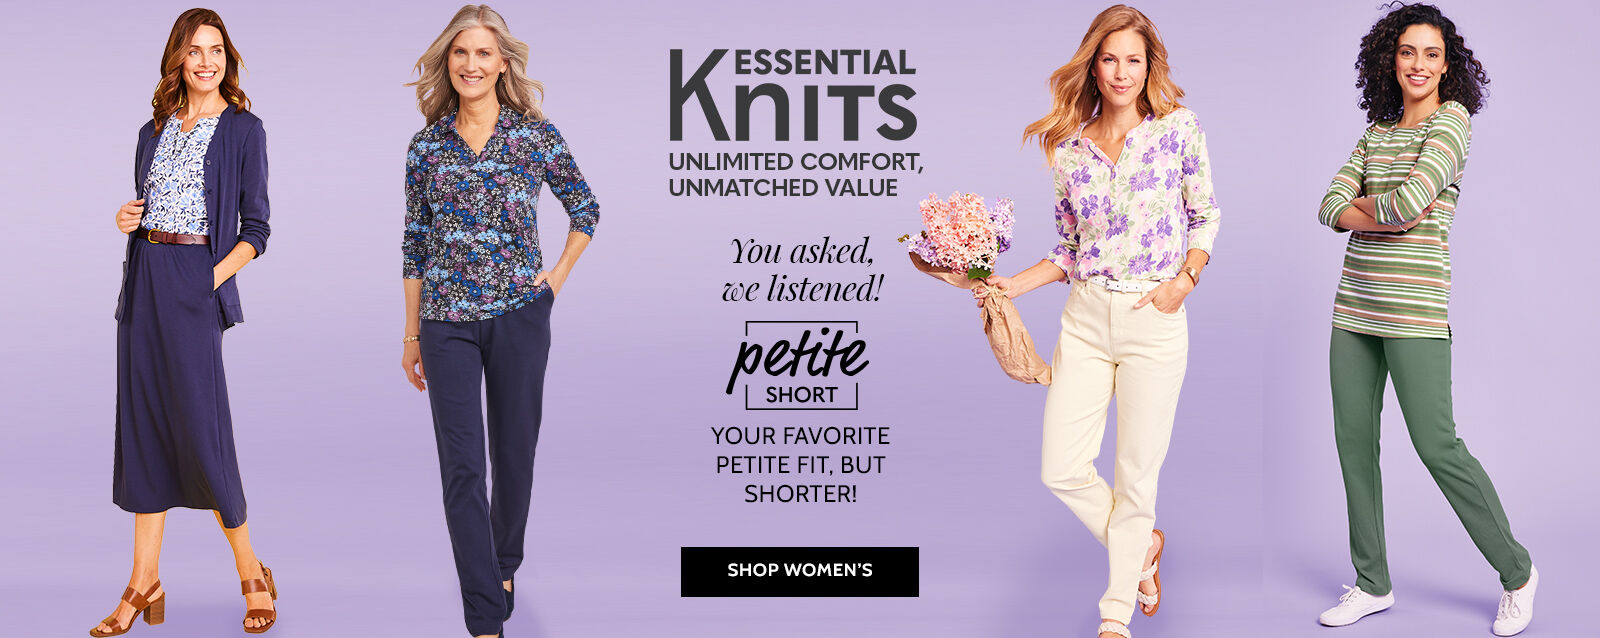 essential knits unlimited comfort, unmatched value you asked, we listened! petite short your favorite petite fit, but shorter! shop women's